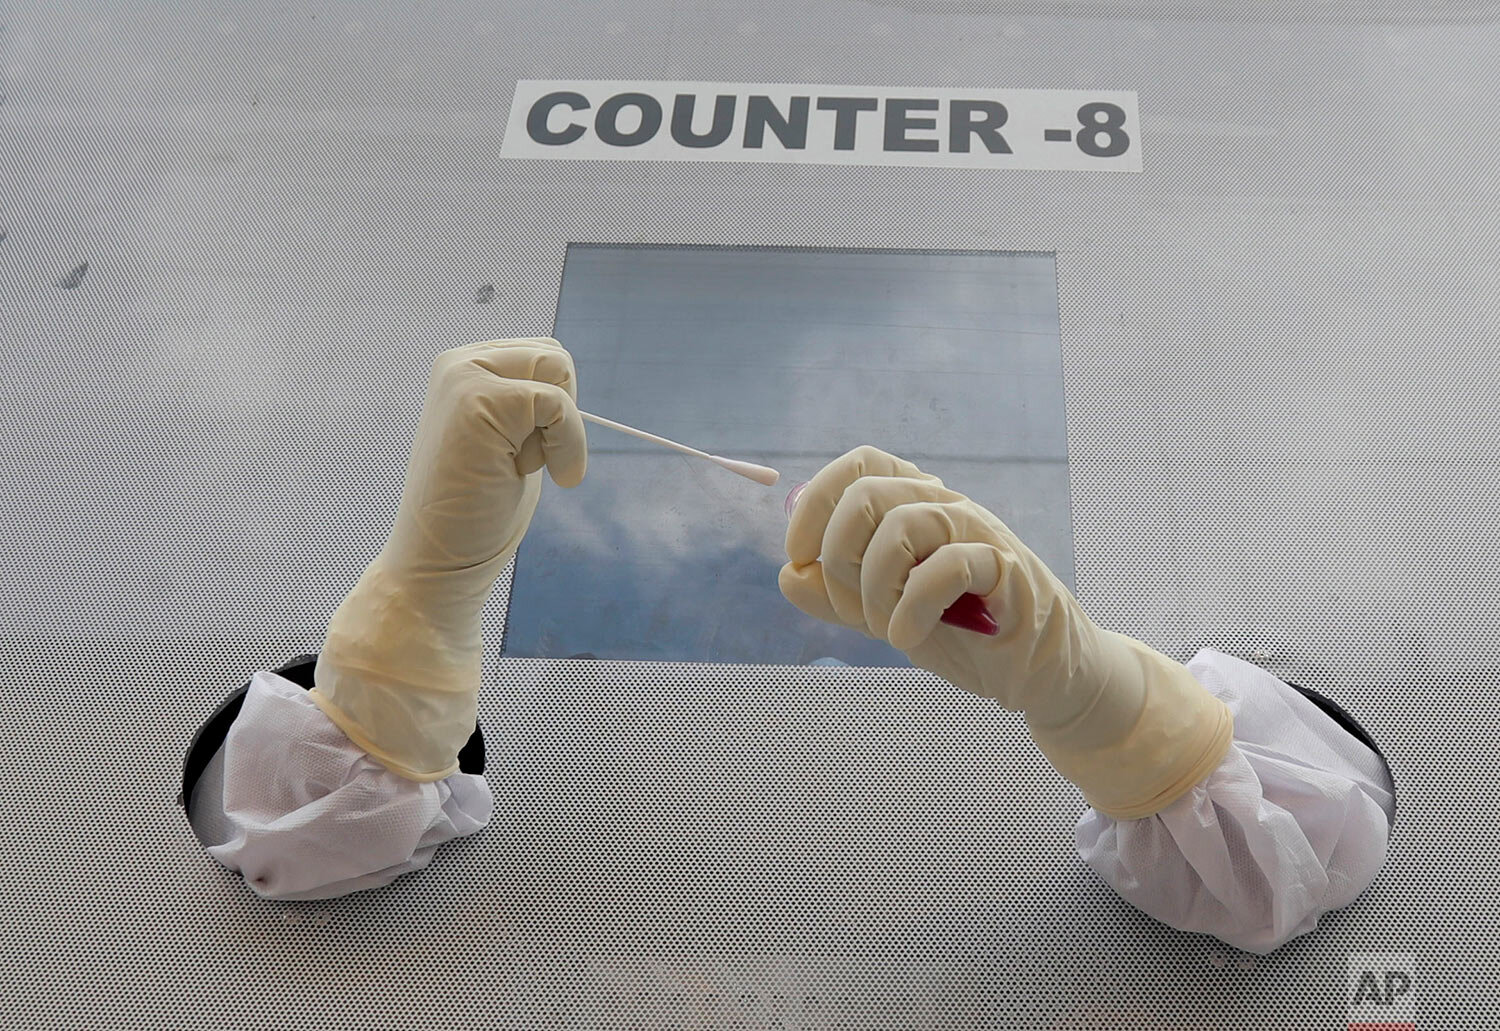  A health worker prepares to collect nasal swab samples for COVID-19 tests at a mobile testing centre in Hyderabad, India, Friday, July 31, 2020.  (AP Photo/Mahesh Kumar A.) 